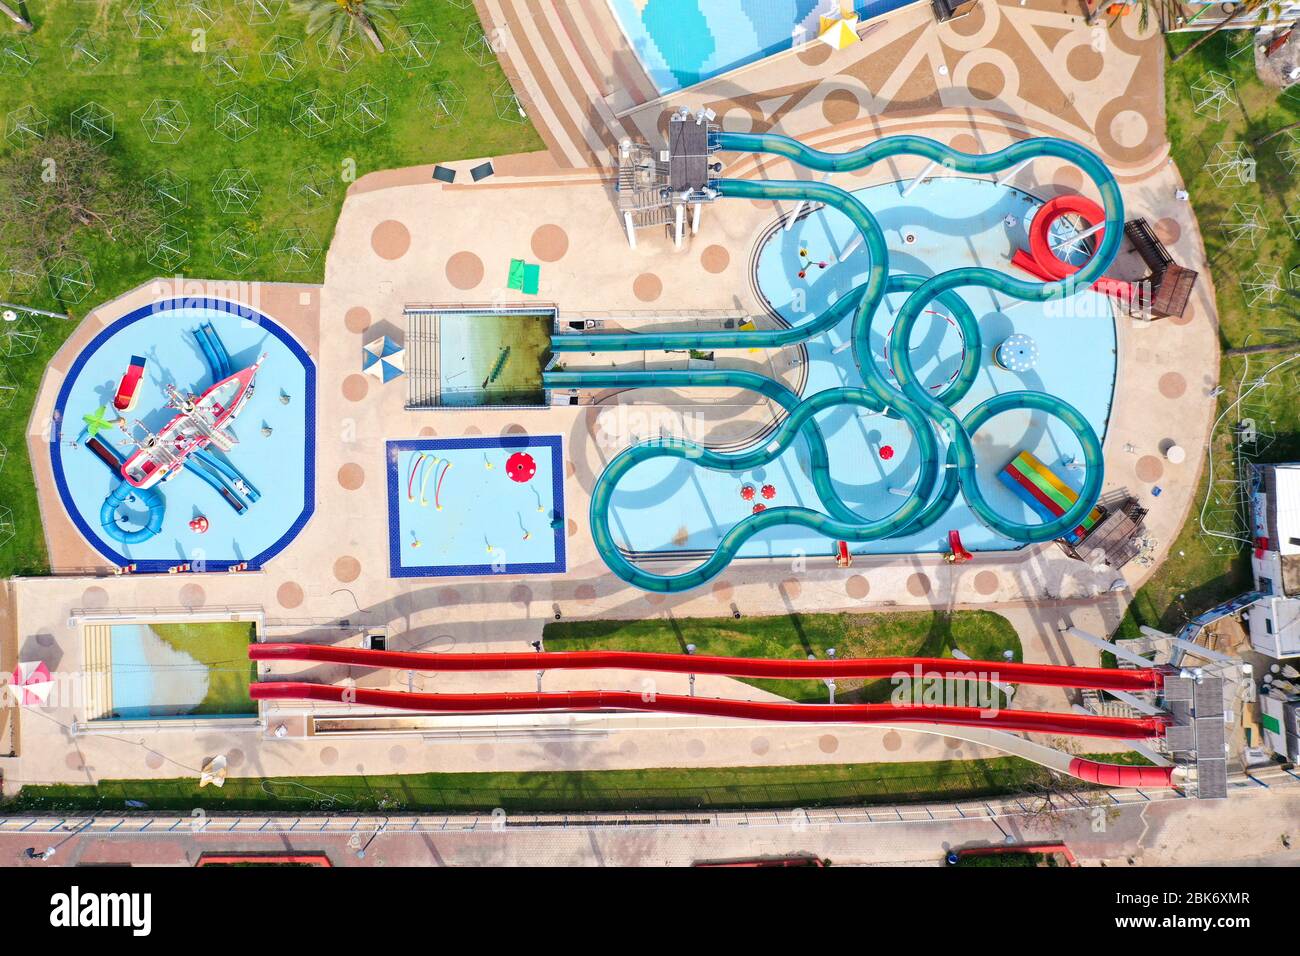 Corona Virus lockdown, Aerial image of a large and empty Water park with various Water slides and pools due to government guidelines. Stock Photo